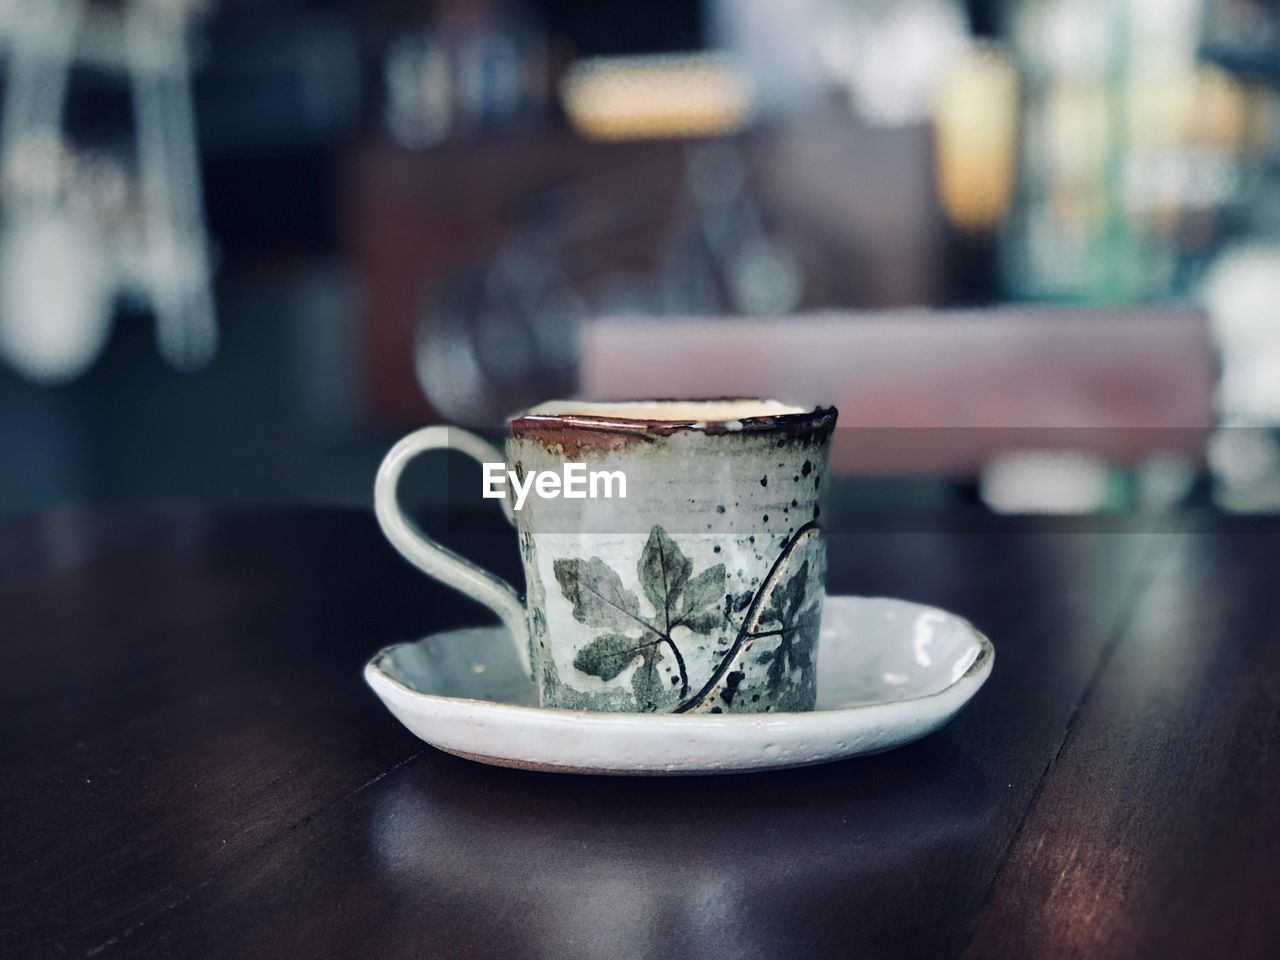 CLOSE-UP OF COFFEE CUP ON TABLE AGAINST CAFE